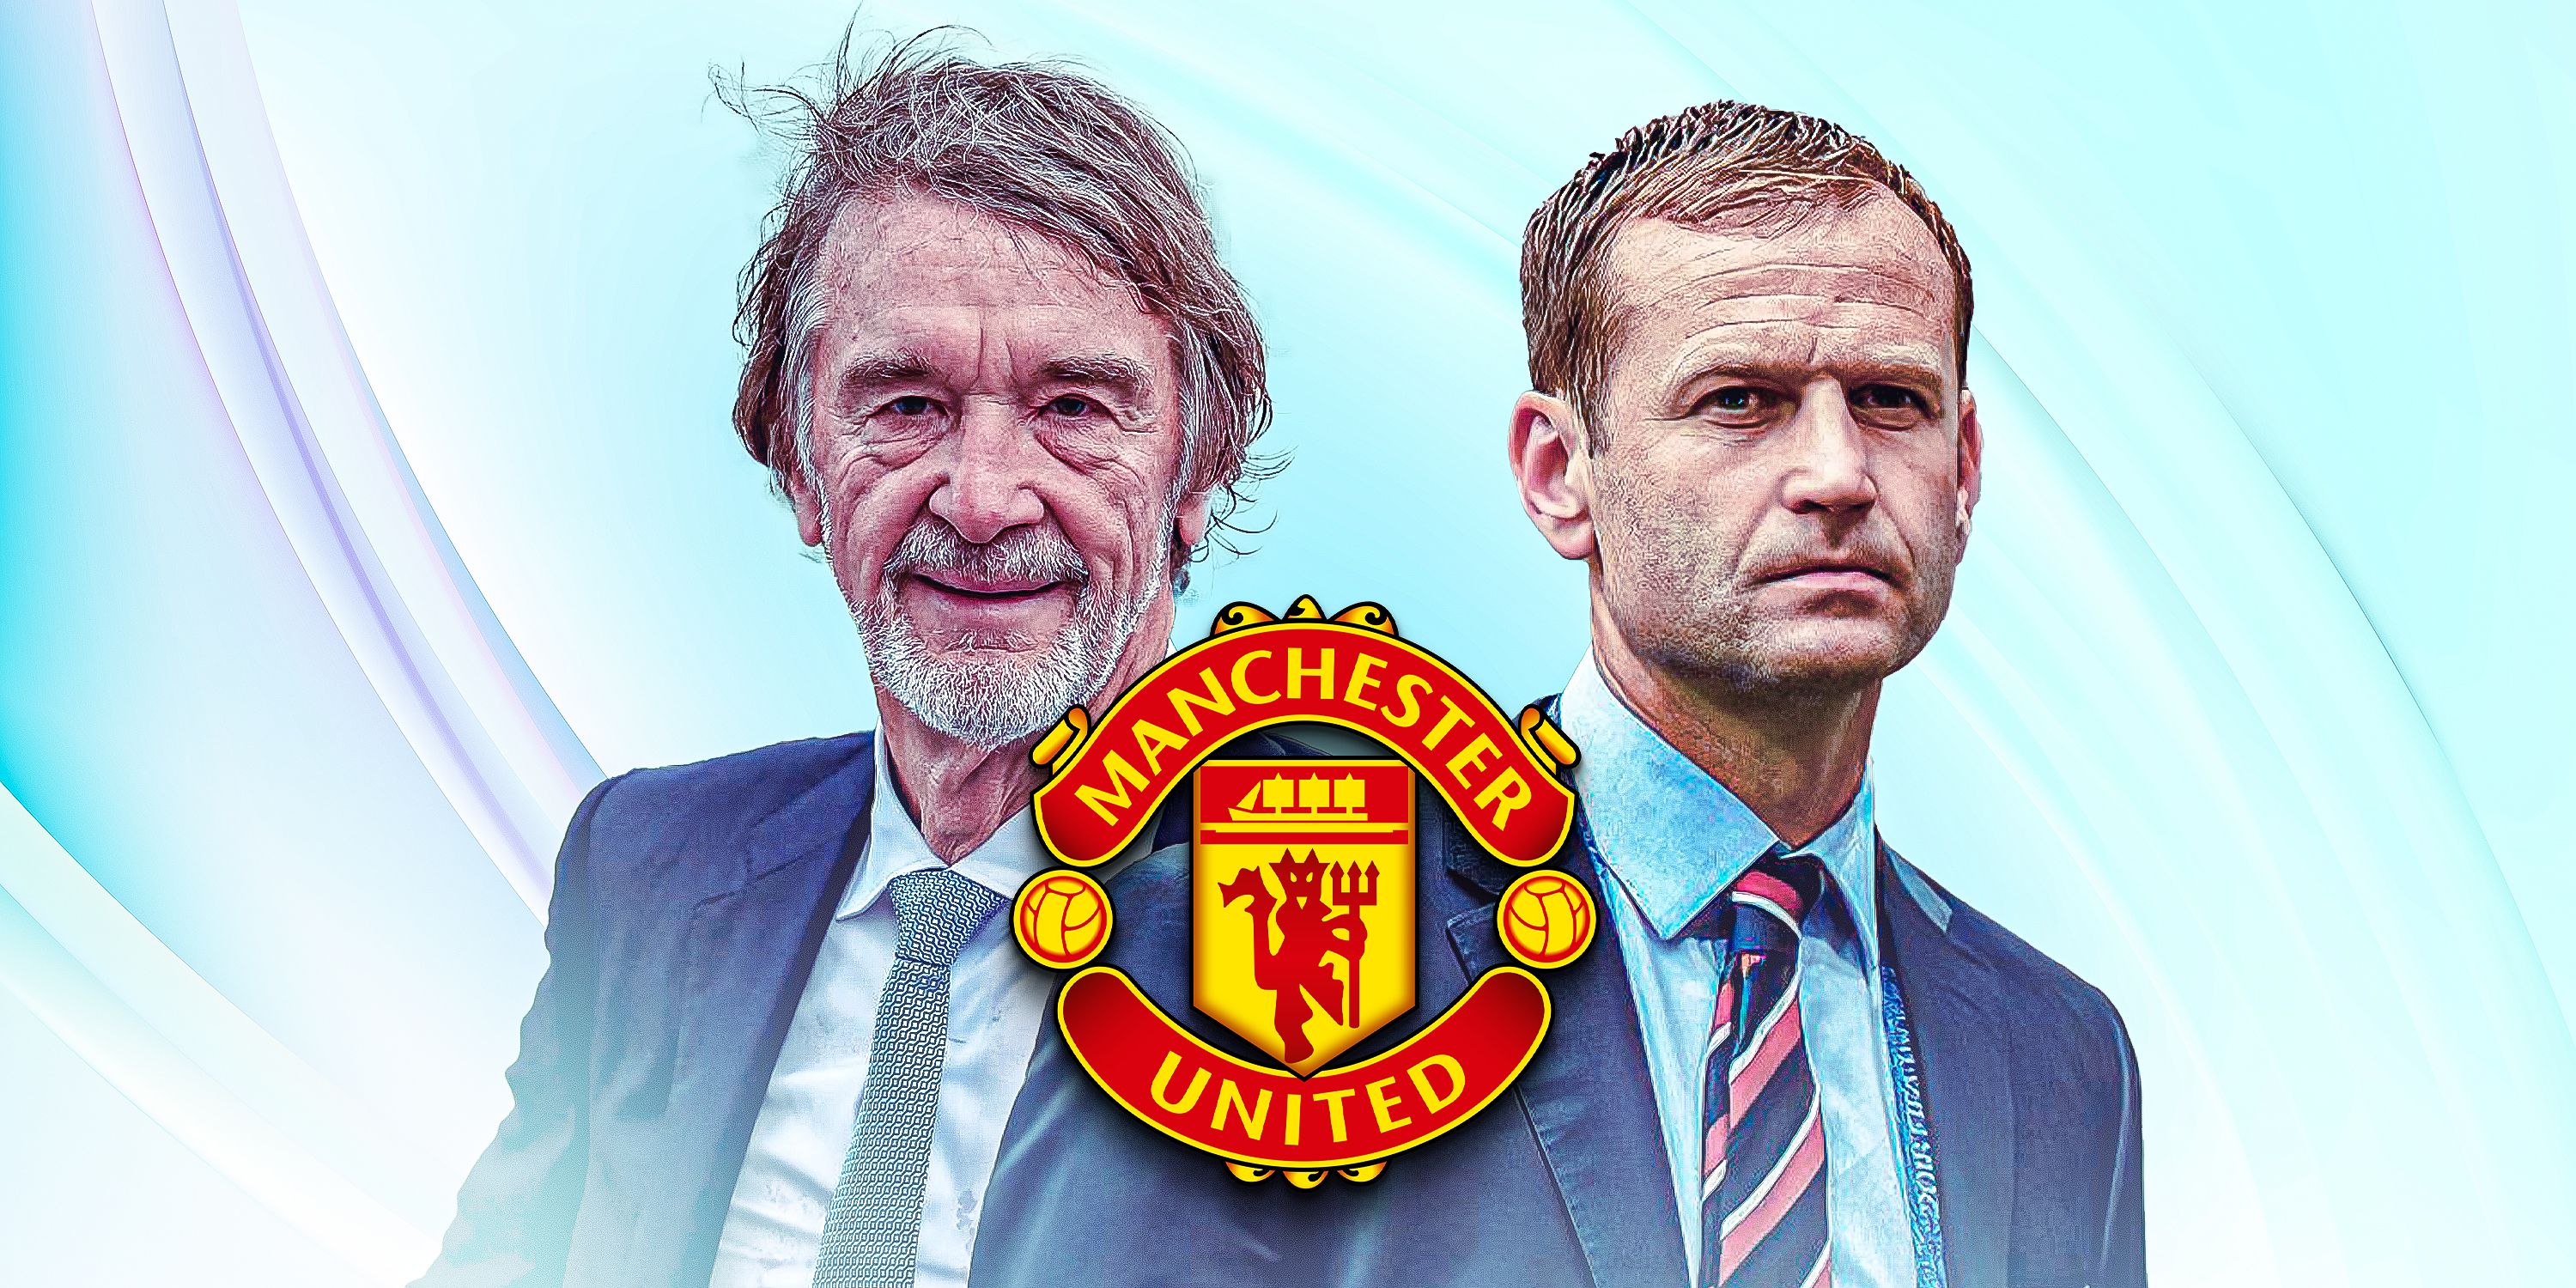 Manchester United co-owner Sir Jim Ratcliffe and Newcastle United sporting director Dan Ashworth watching on